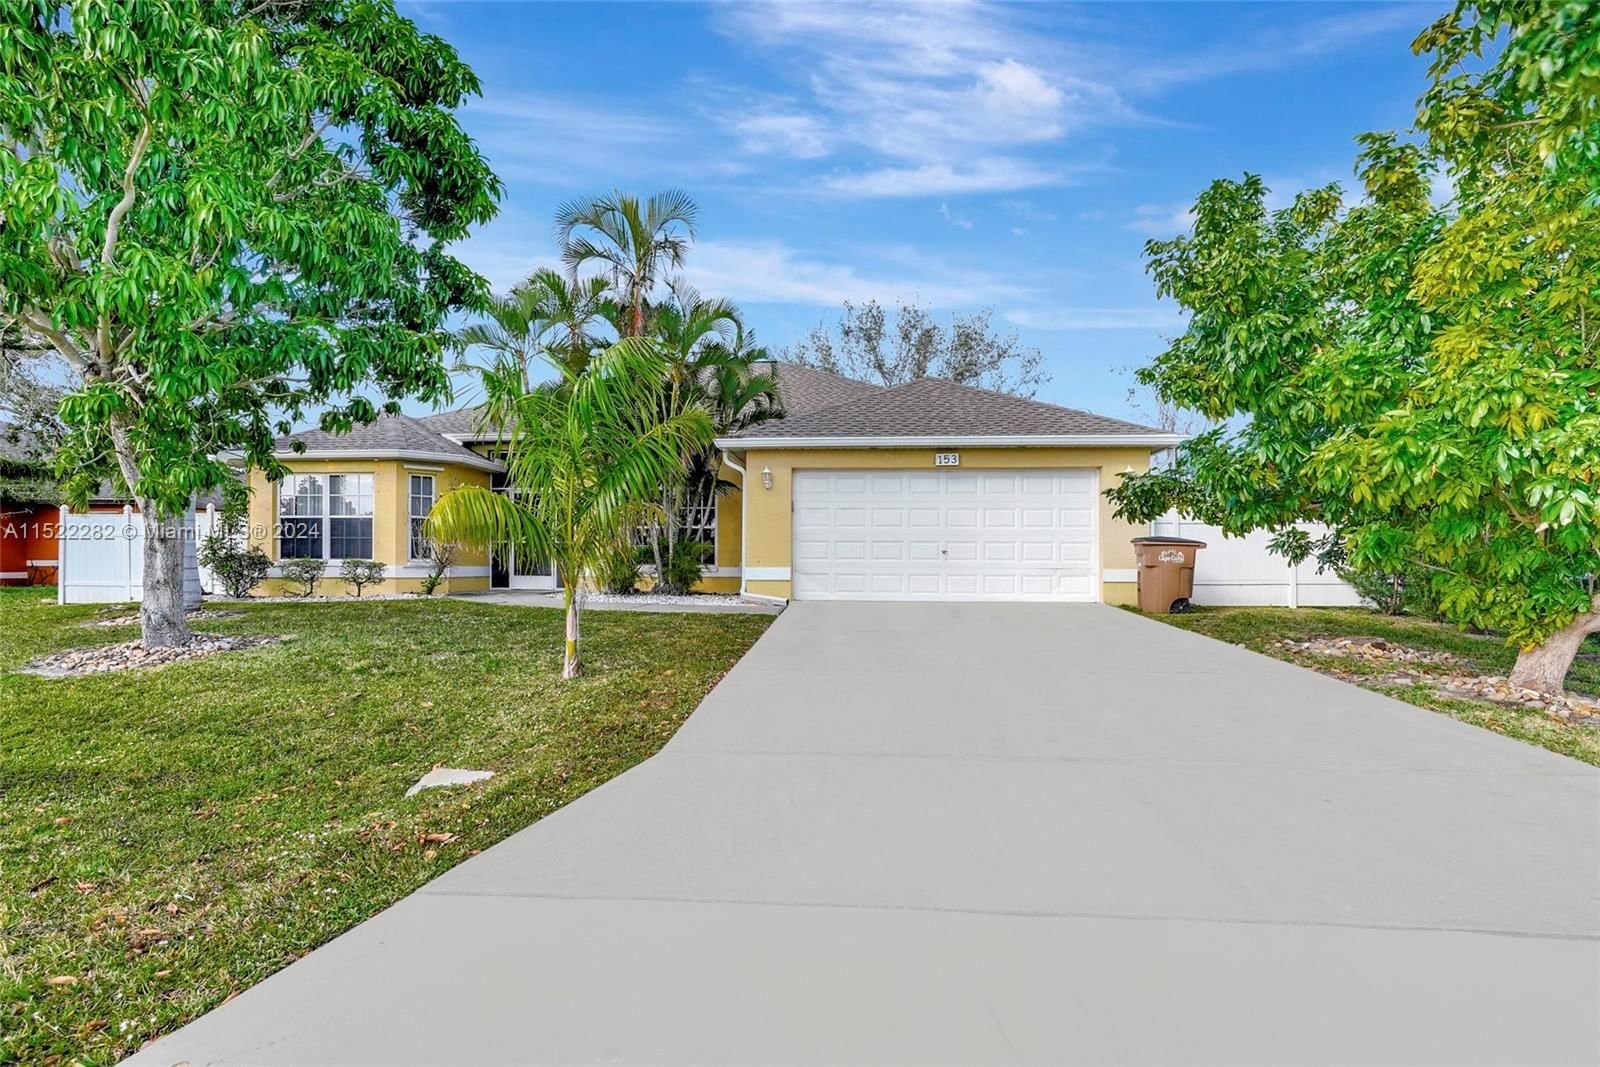 Real estate property located at 153 SE 25 Lane, Lee County, n/a, Cape Coral, FL